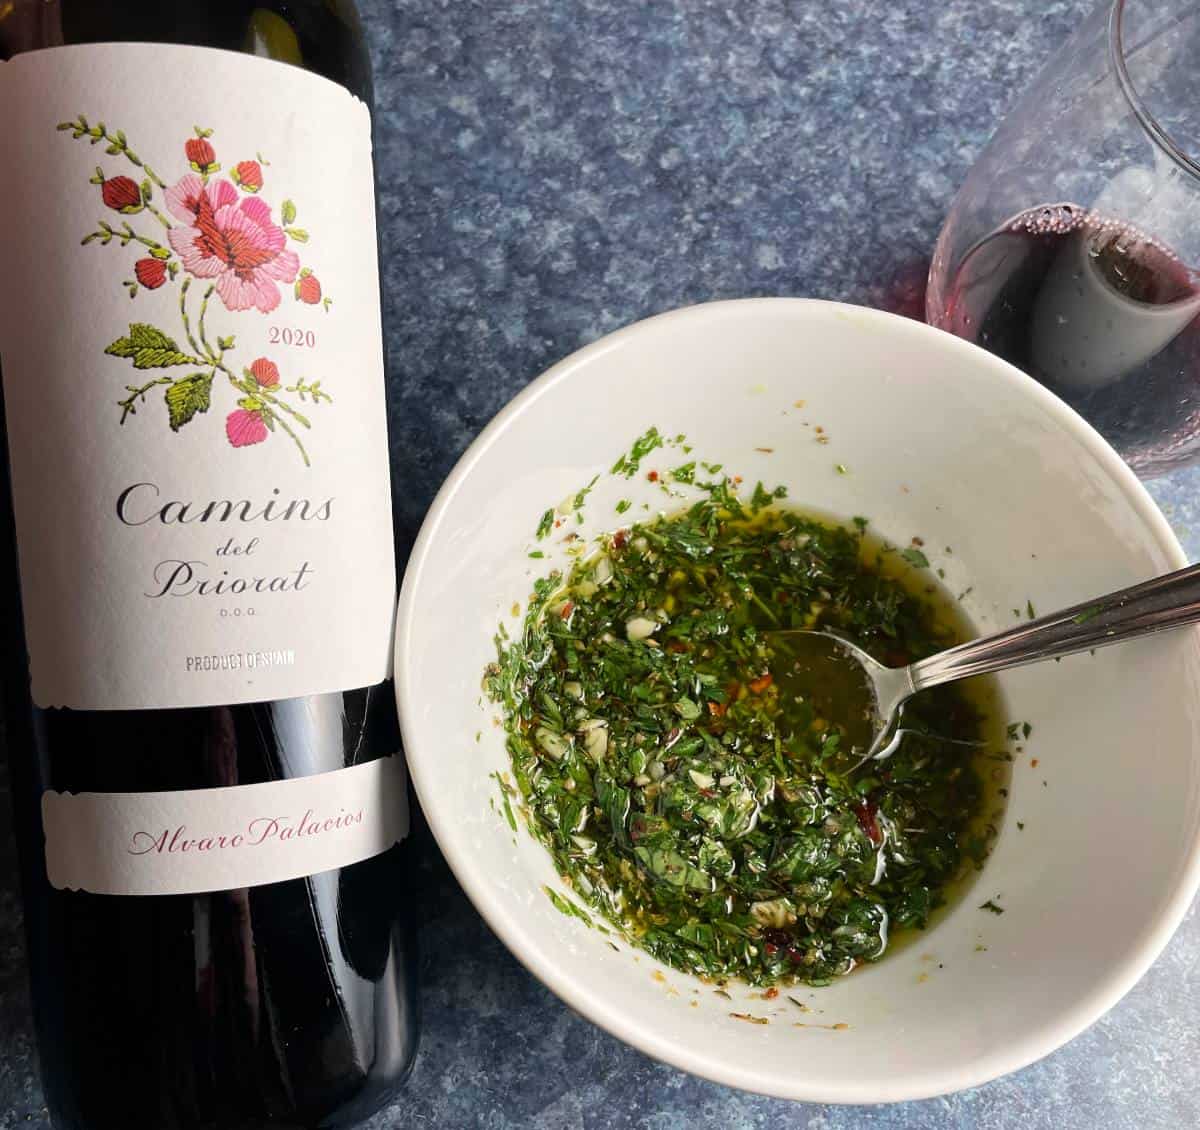 bowl of carrot top chimichurri along with a bottle of Priorat red wine.